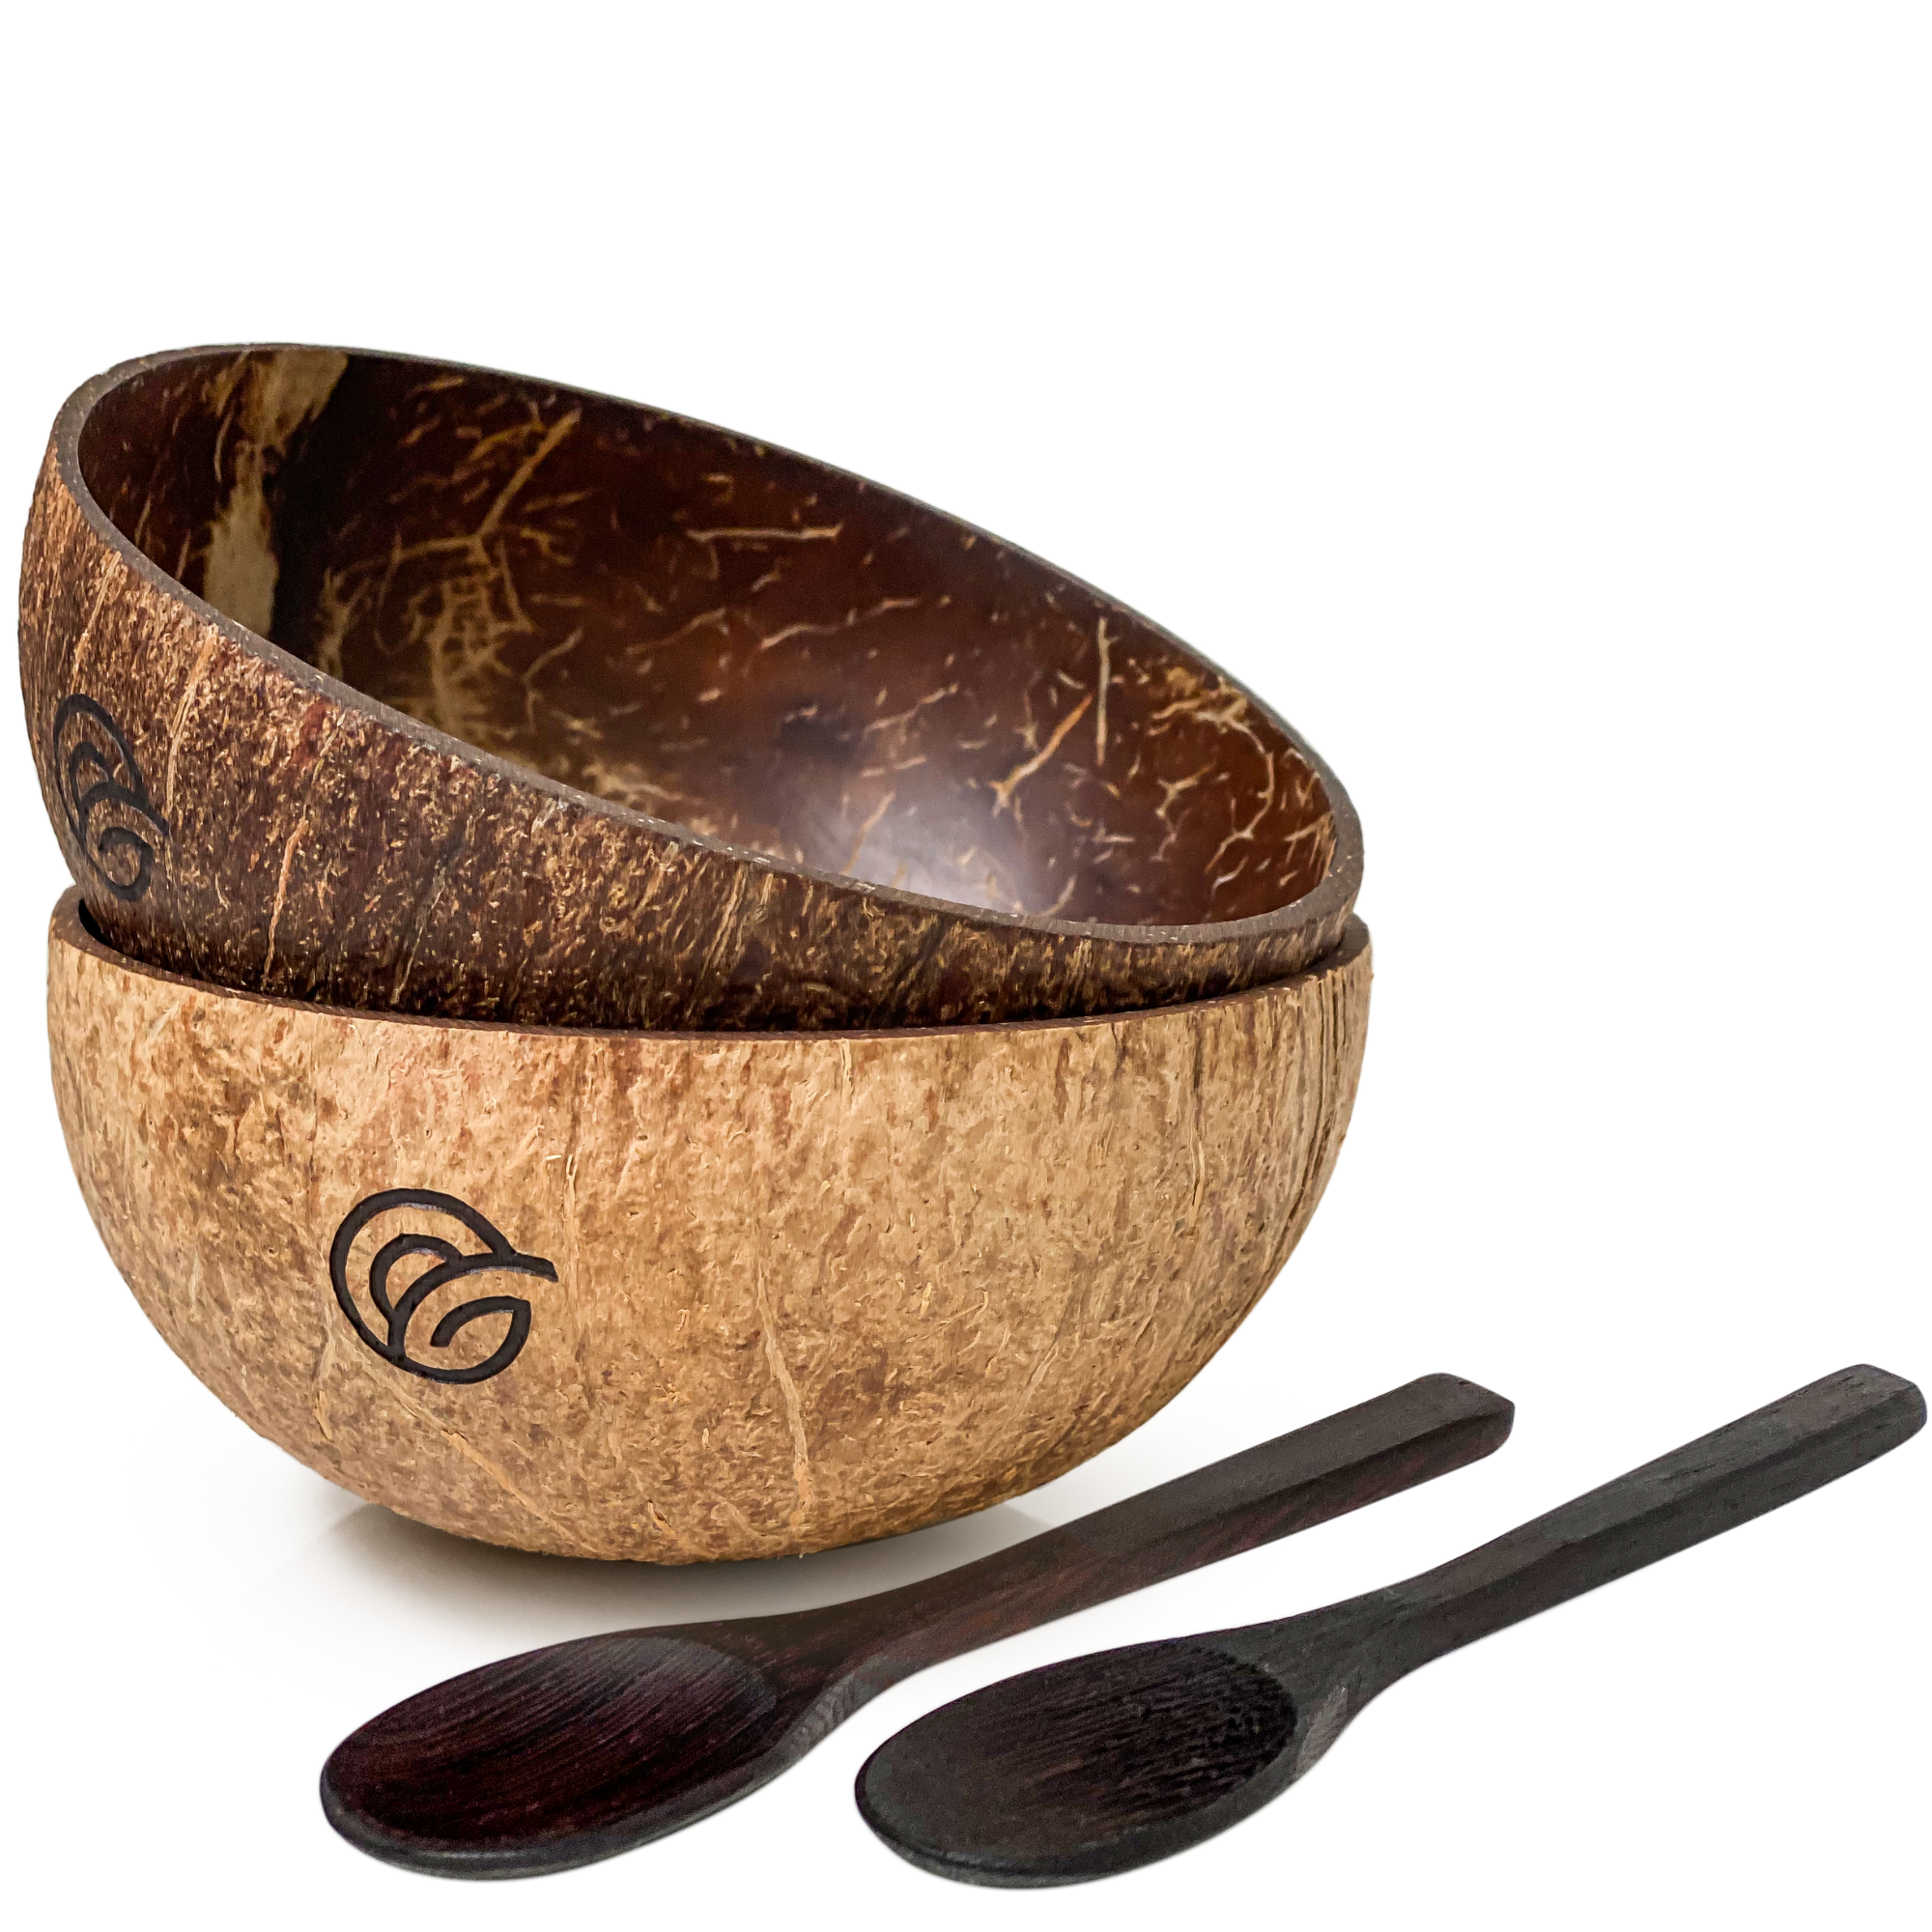 Coconut Bowls and Wooden Spoons Set of 2 Natural